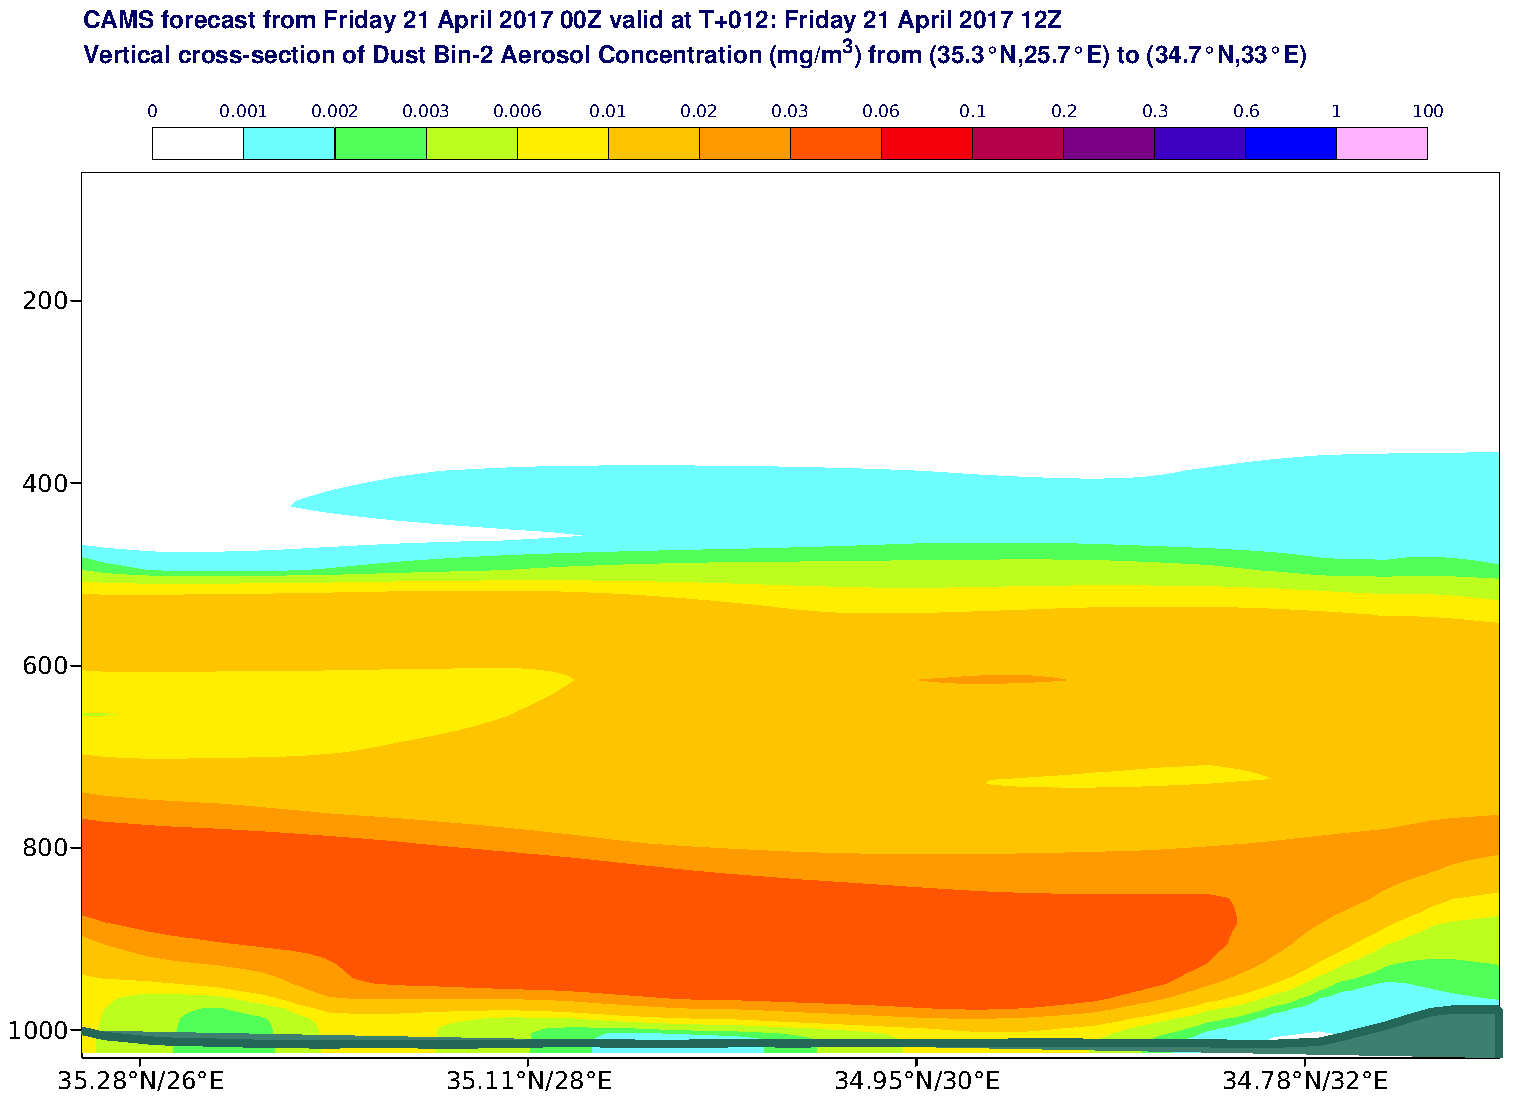 Vertical cross-section of Dust Bin-2 Aerosol Concentration (mg/m3) valid at T12 - 2017-04-21 12:00